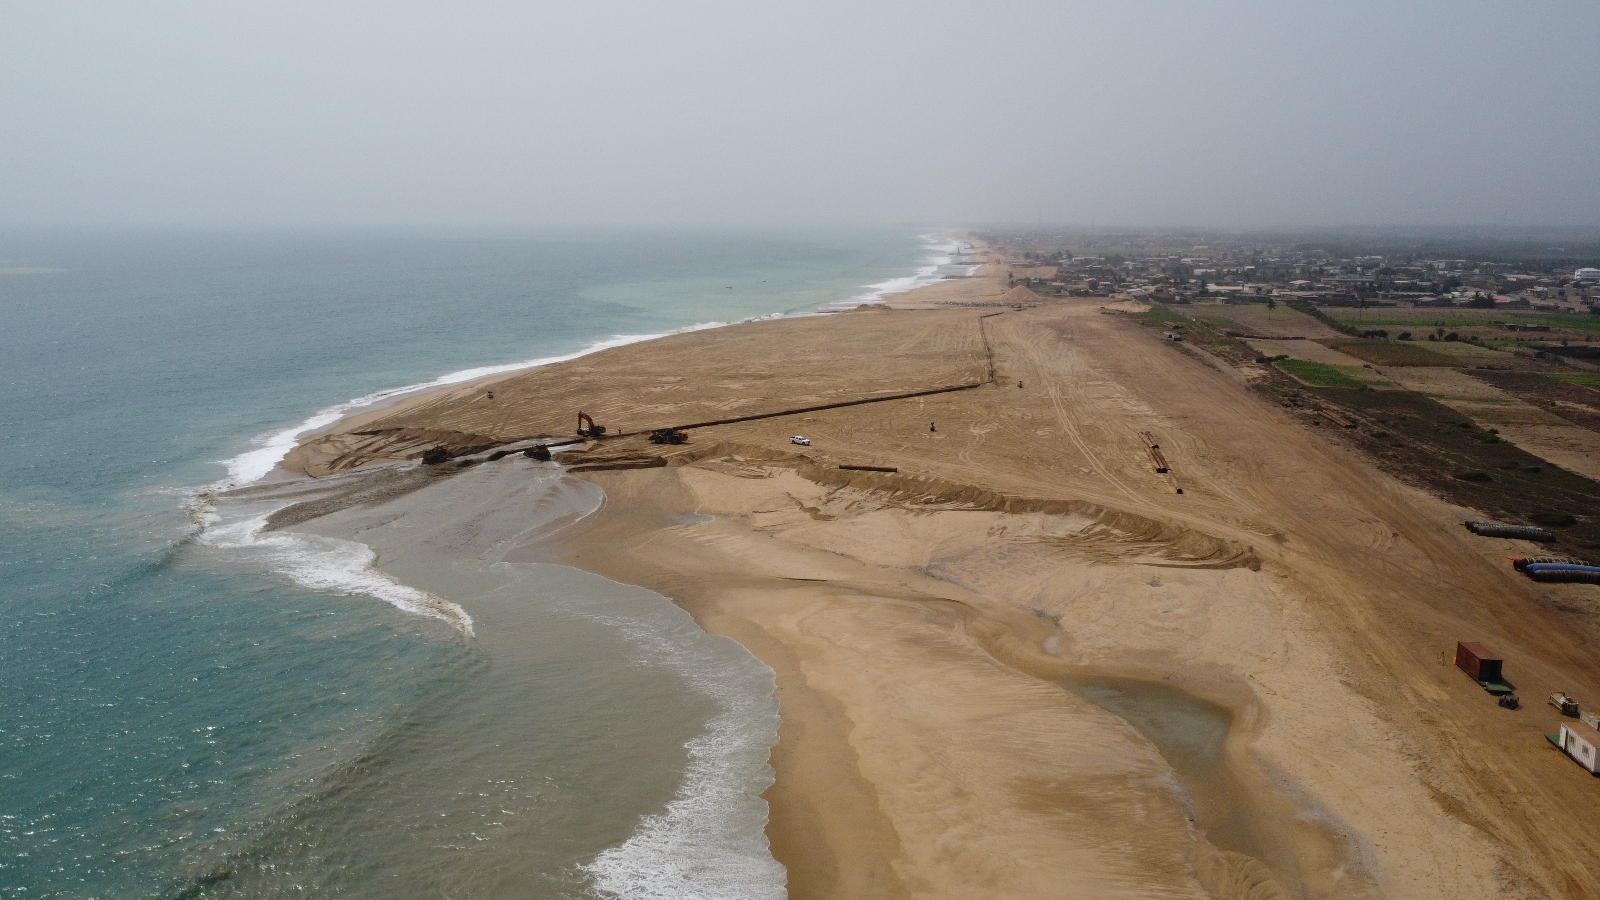 An aerial shot shows the shape of a 'sand motor' project in Benin. The project was built by the dredging firm Boskalis with funding from a World Bank erosion initiative.